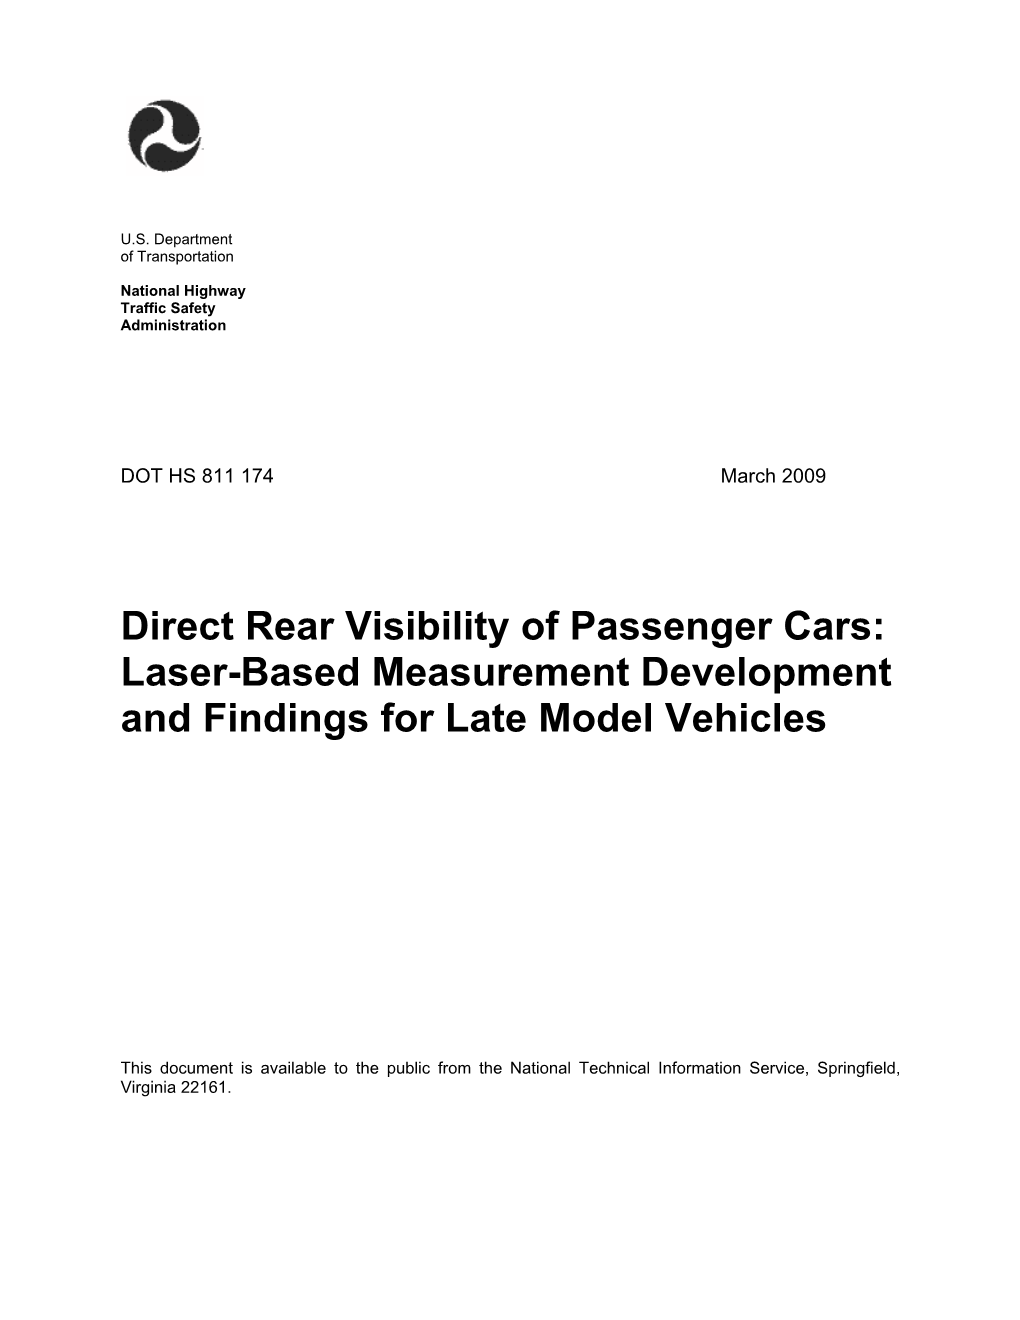 Direct Rear Visibility of Passenger Cars: Laser-Based Measurement Development and Findings for Late Model Vehicles